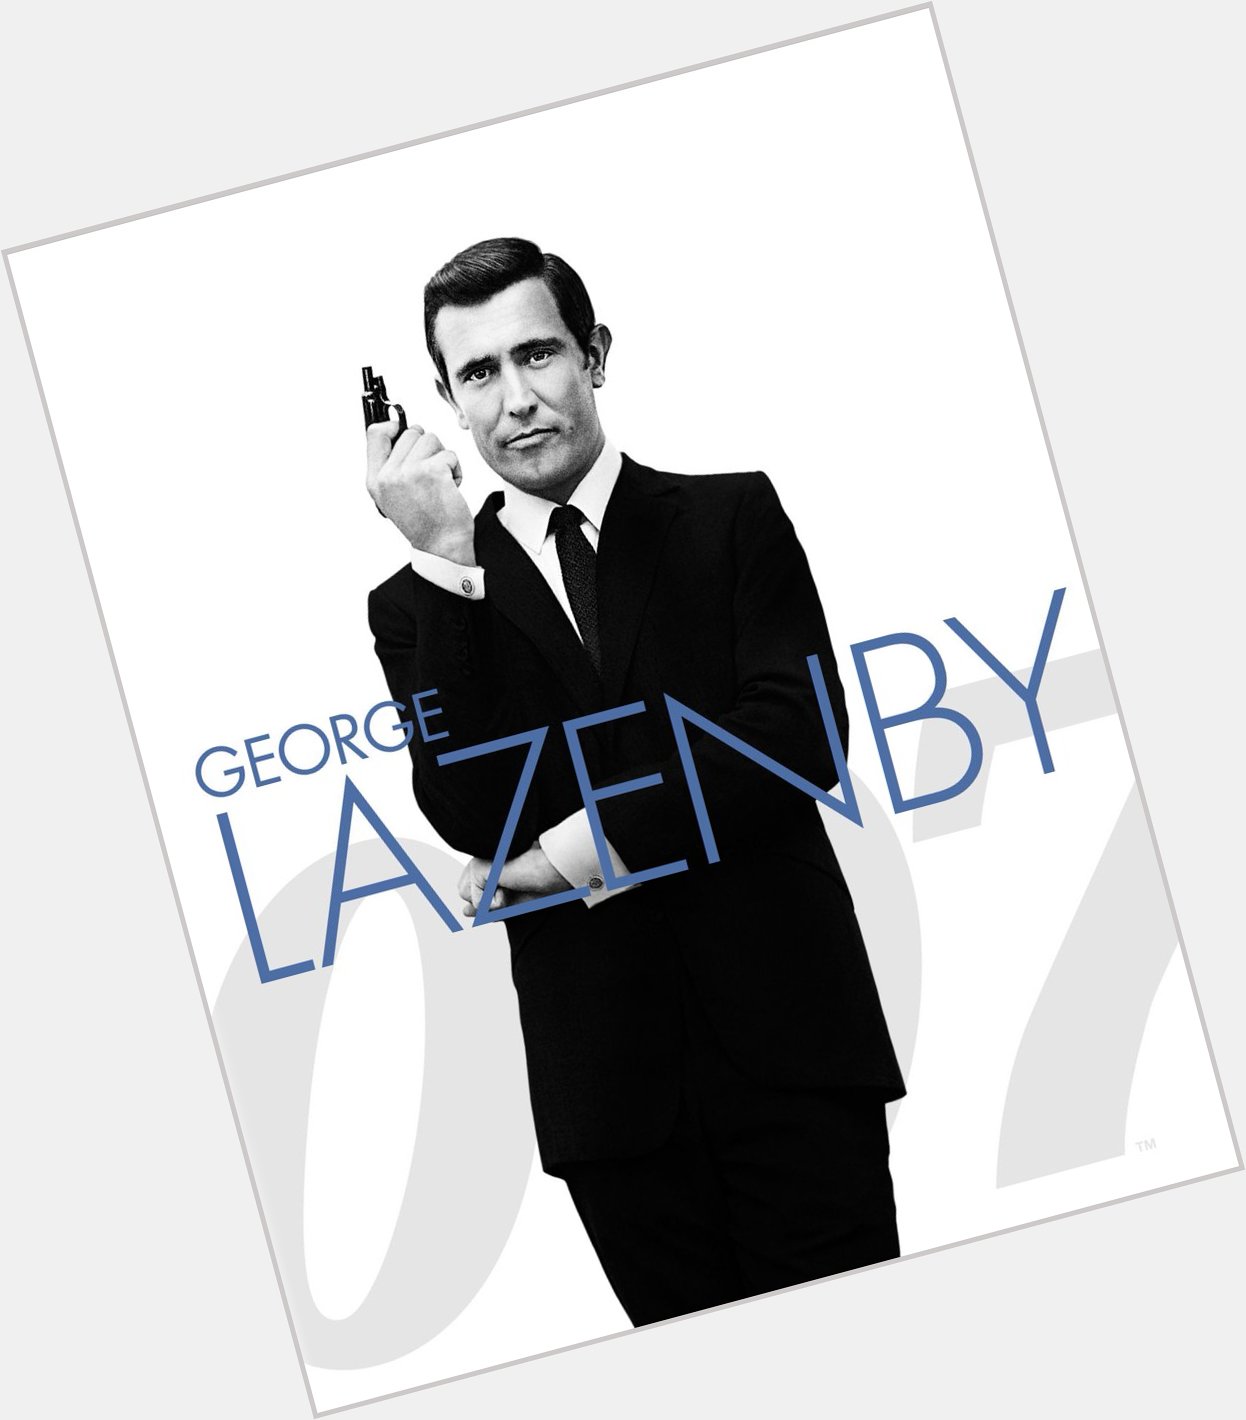 Wishing George Lazenby a very Happy Birthday! . Very excited about meeting him at     